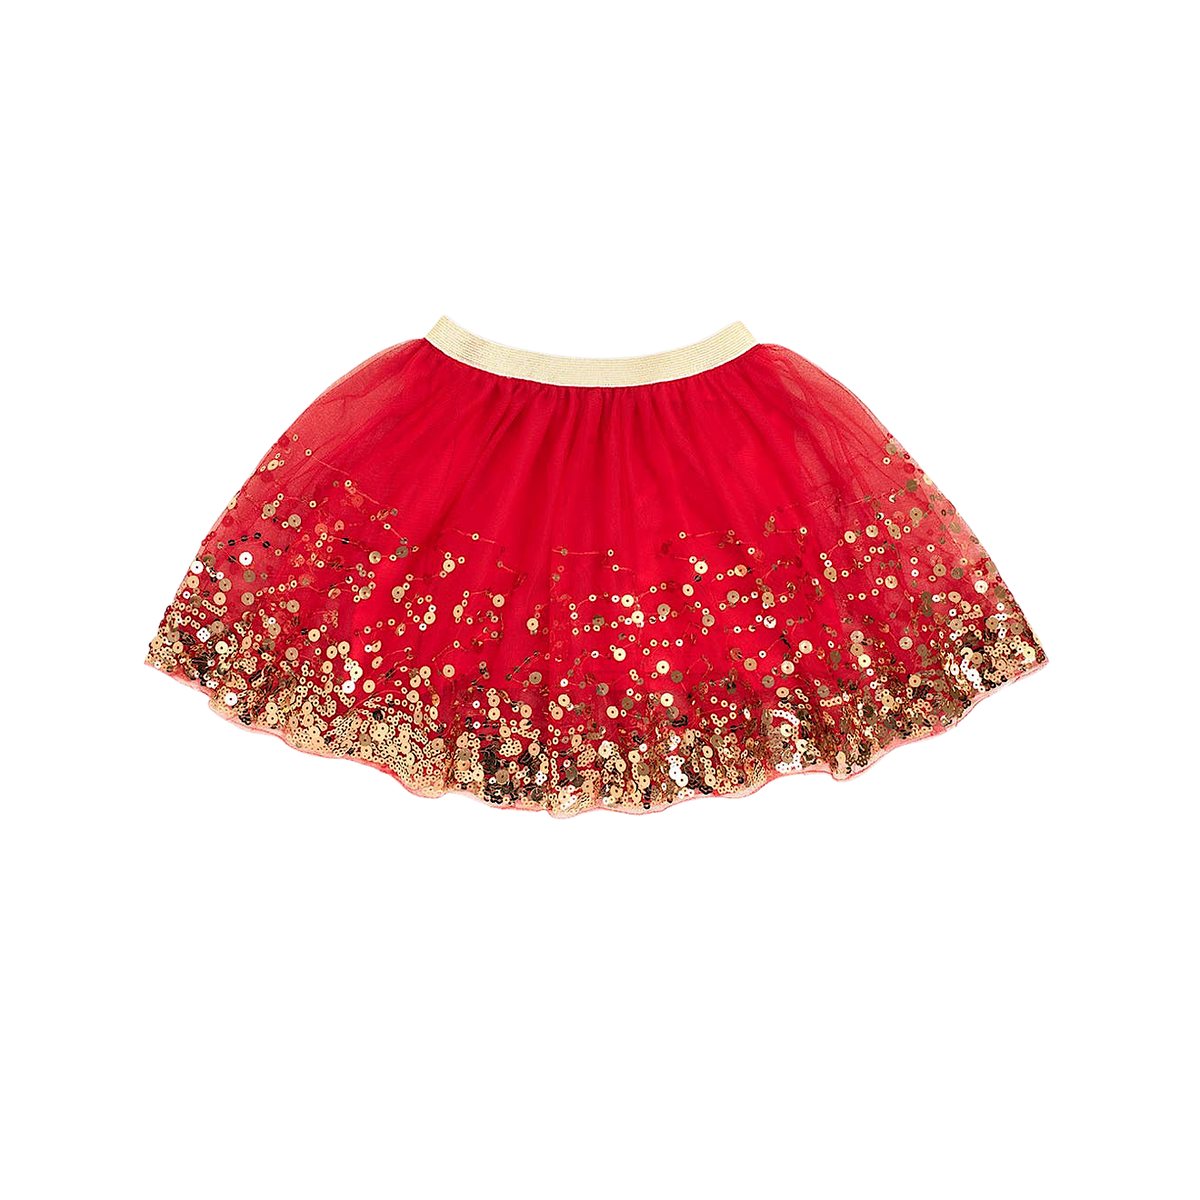 Red and Gold Sequined Tutu